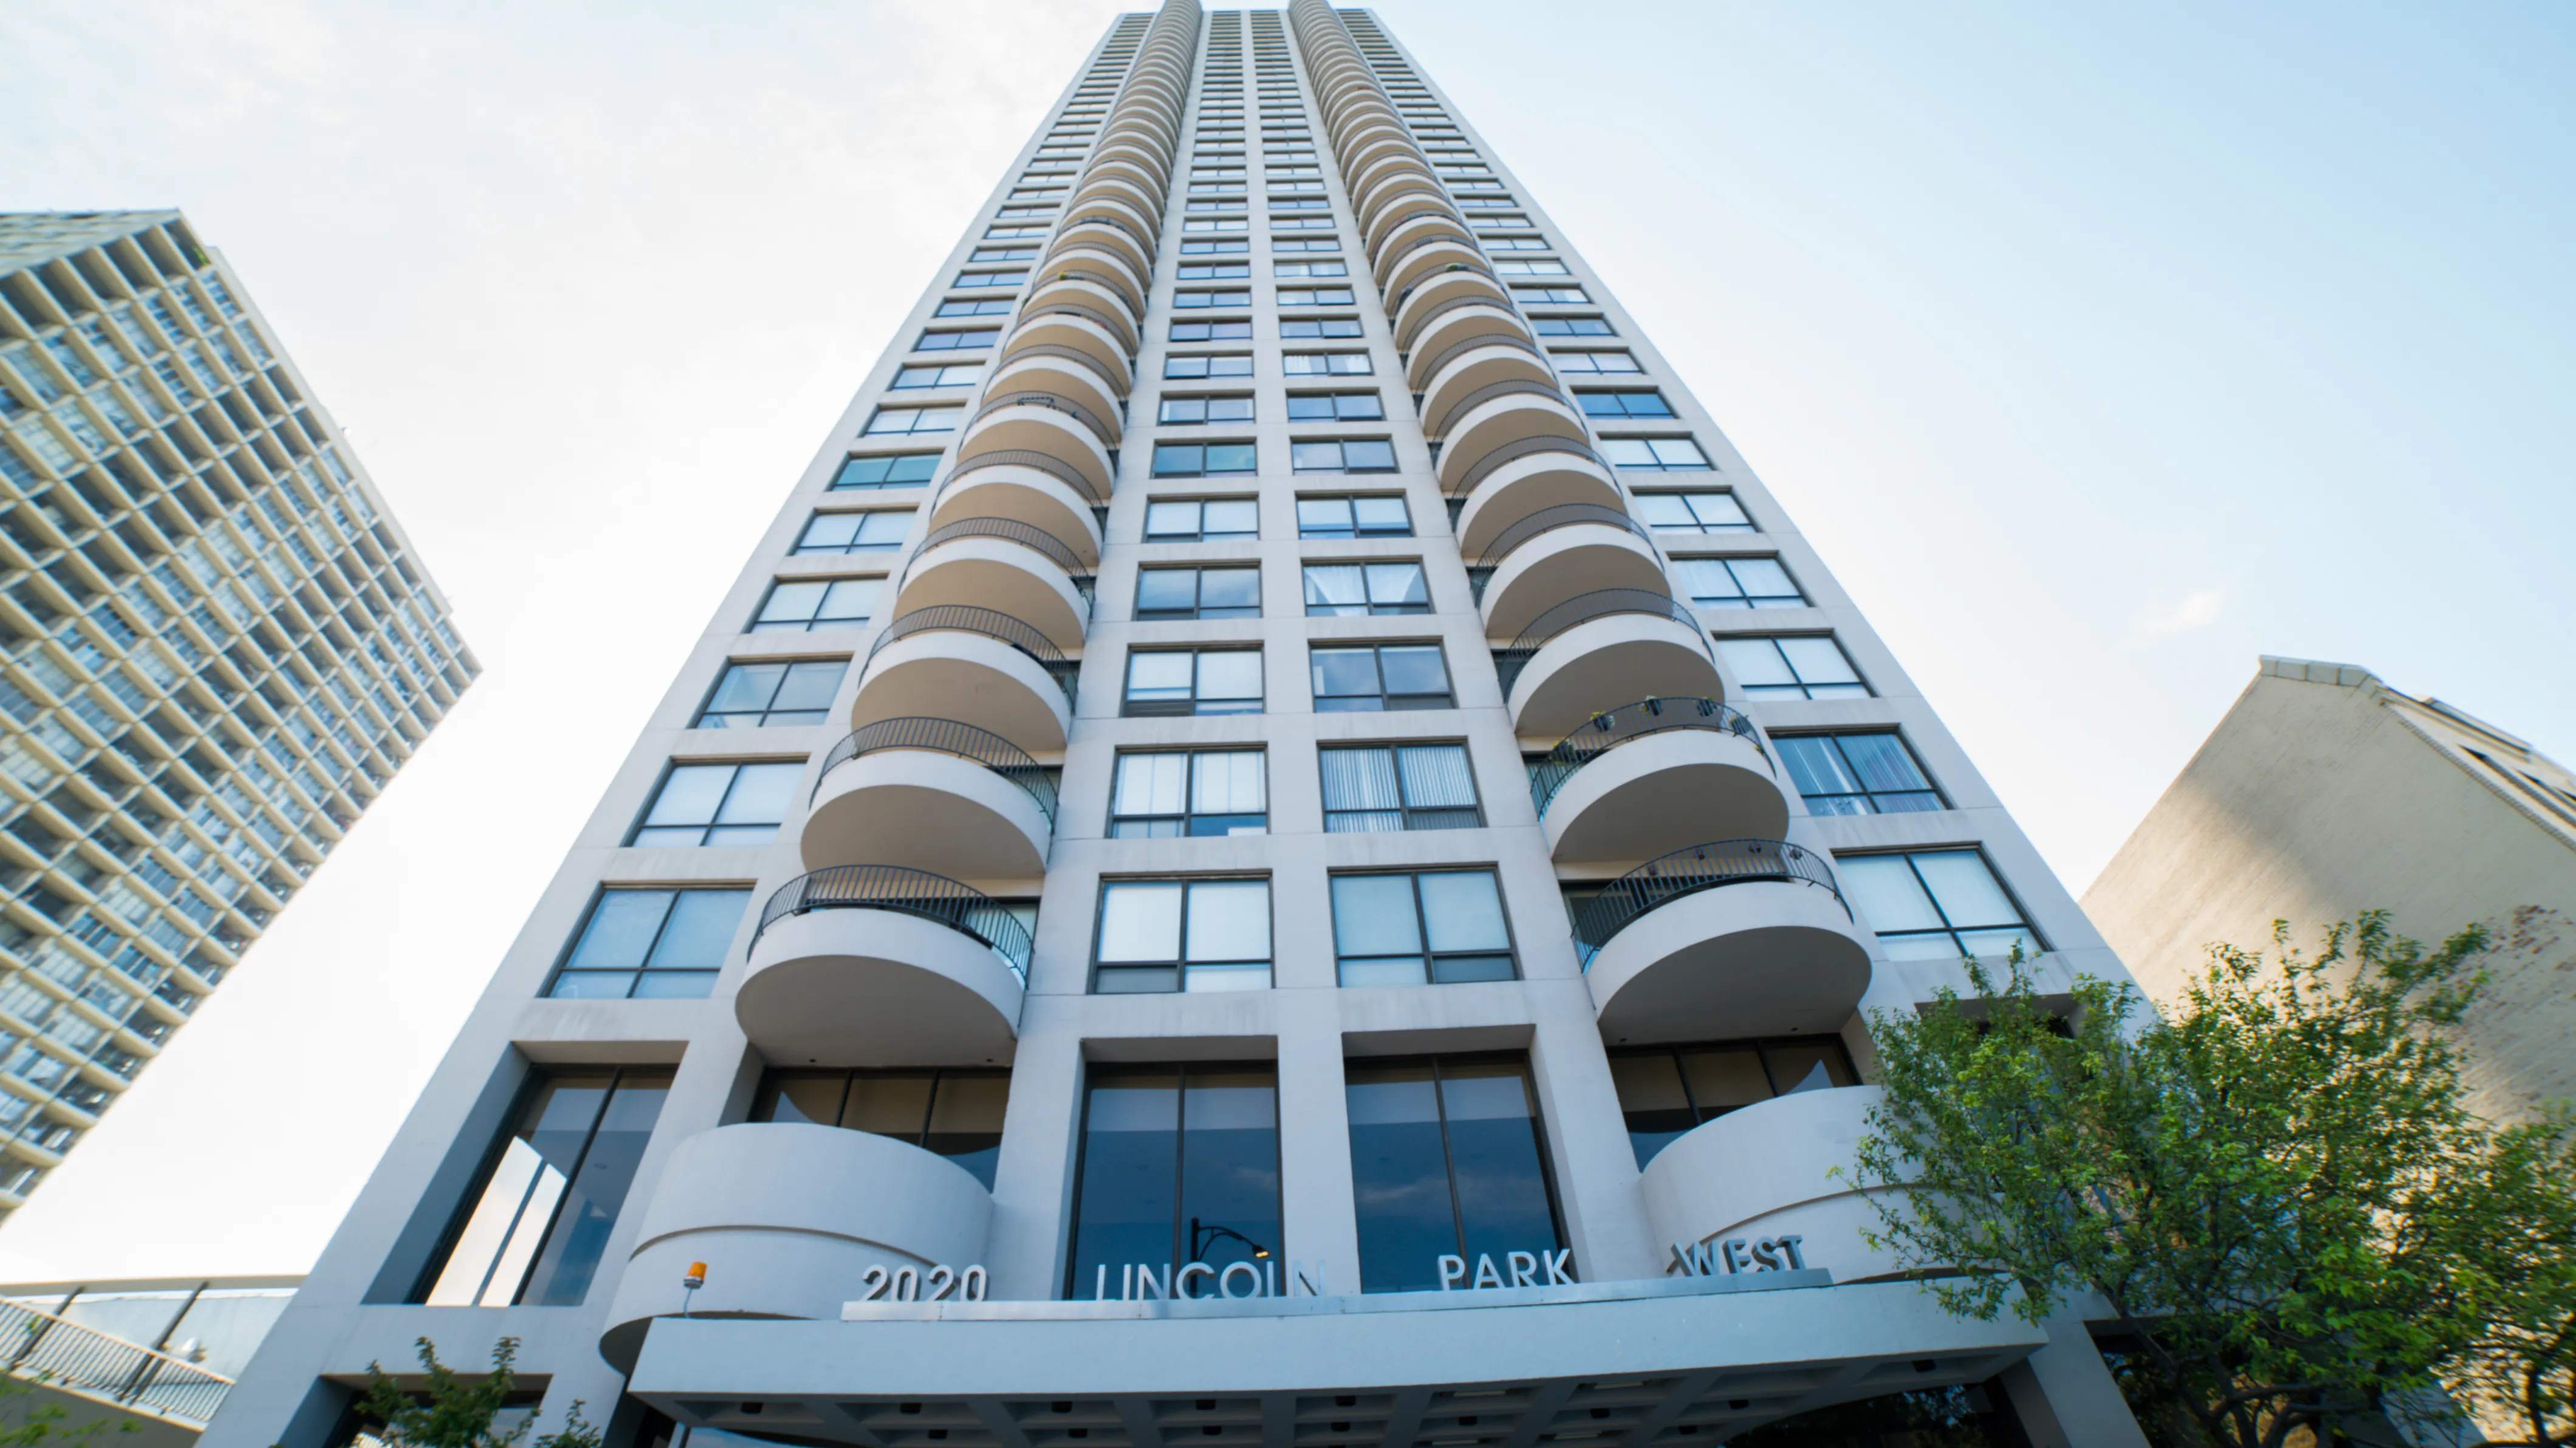 2020 N LINCOLN PARK WEST 60614-2020 N Lincoln Park West-Chicago-IL